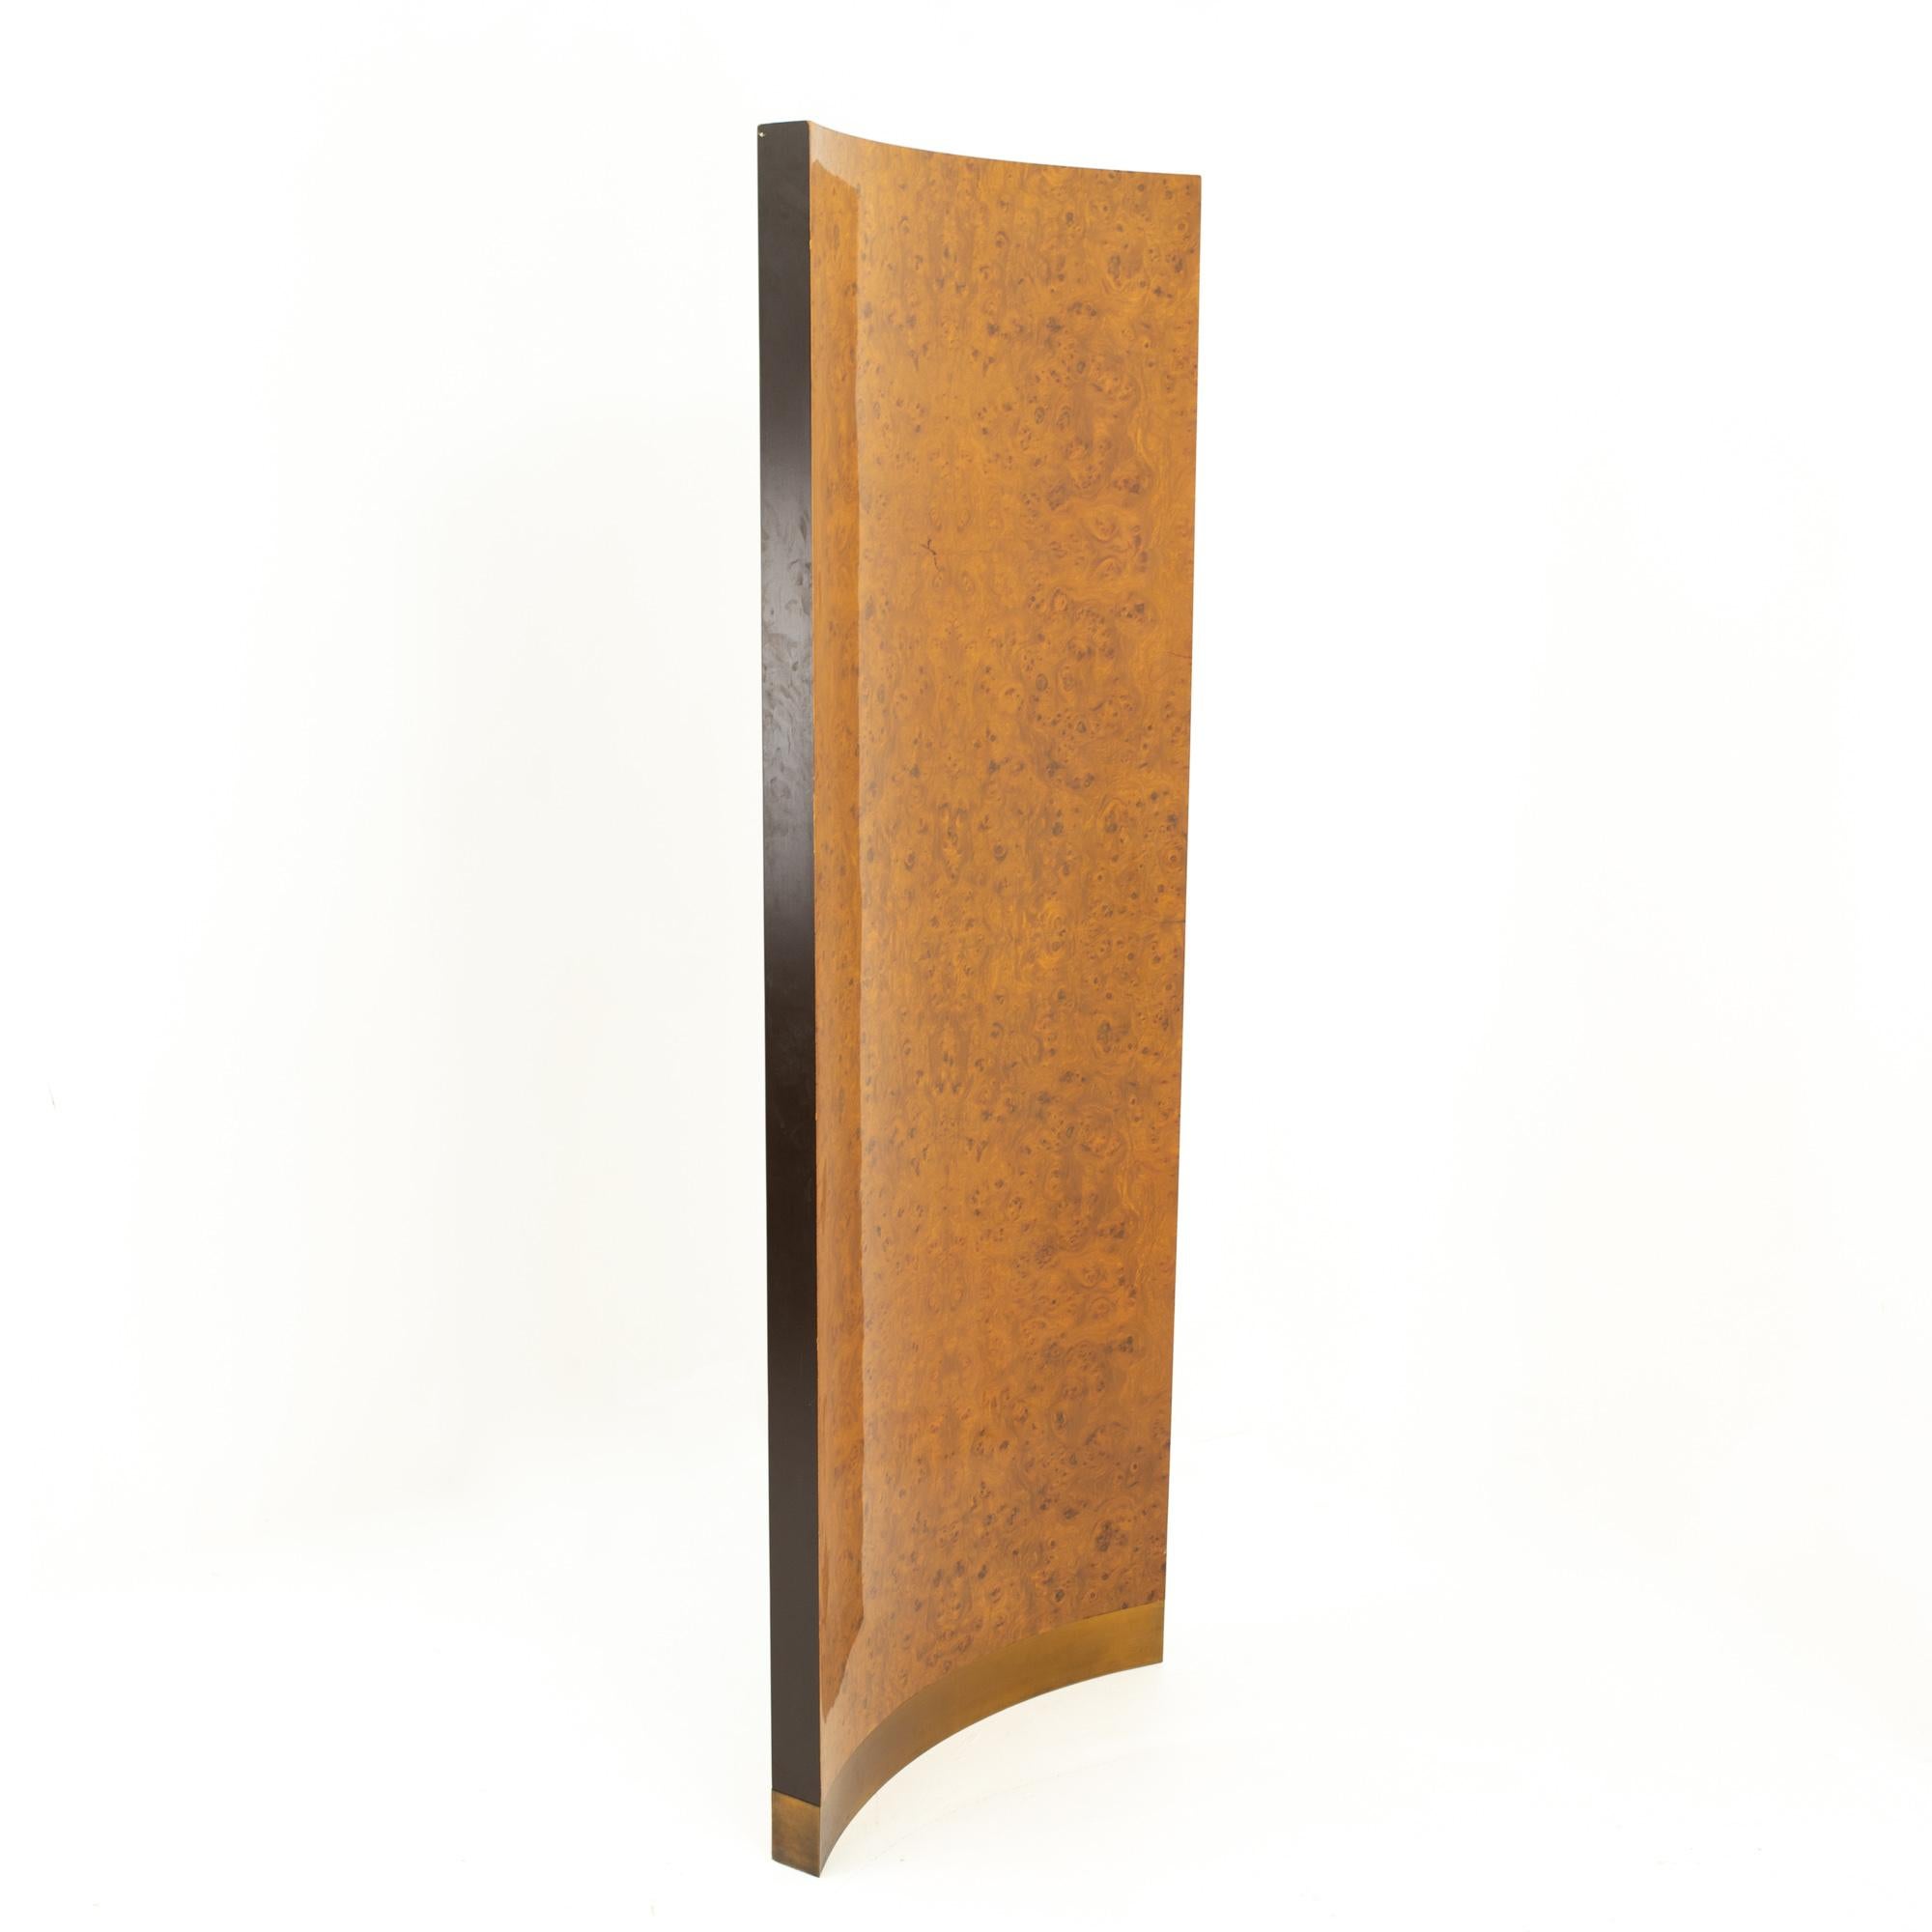 Milo Baughman Style Mid Century Burl Wood Room Divider In Good Condition For Sale In Countryside, IL